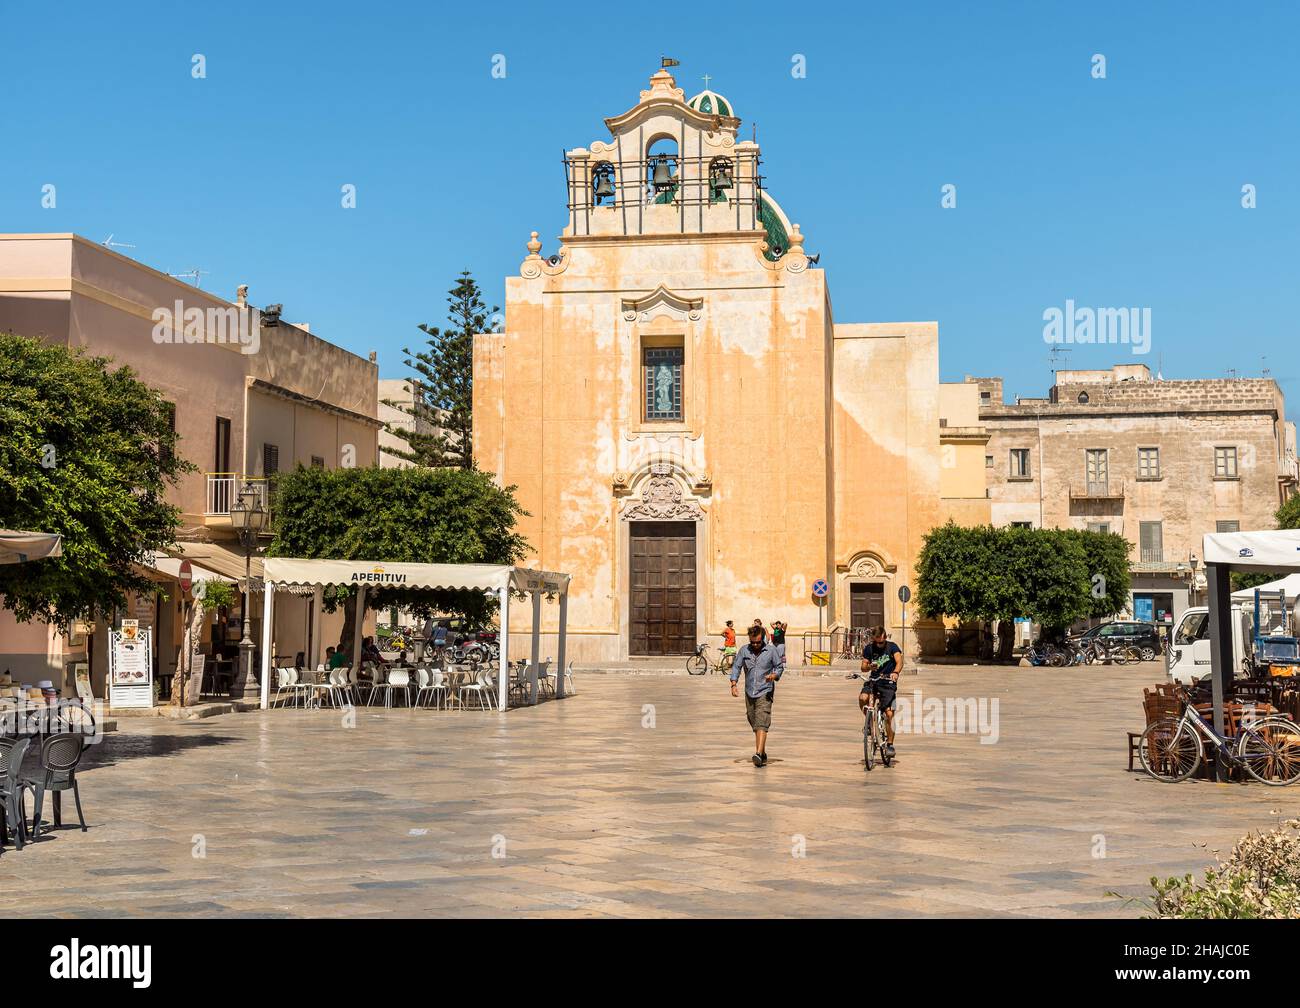 Favignana, Trapani, Italy - September 22, 2016: View of the Madrice church in the historic center of Favignana, one of the Egadi Islands in the Medite Stock Photo